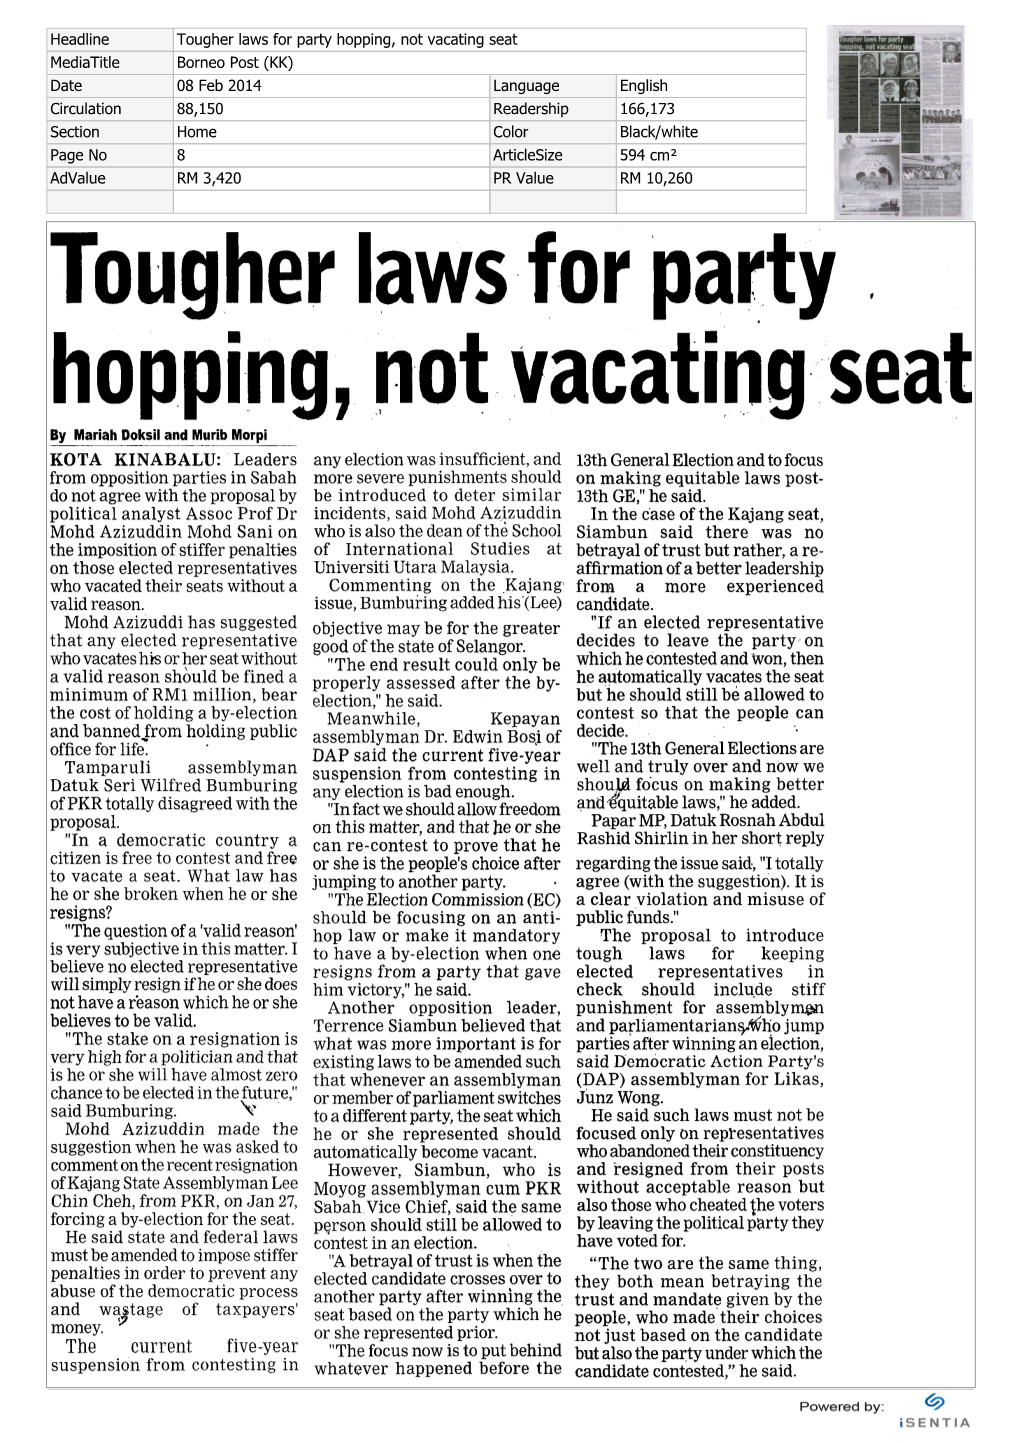 Tougher Laws for Party Hopping, Not Vacating Seat